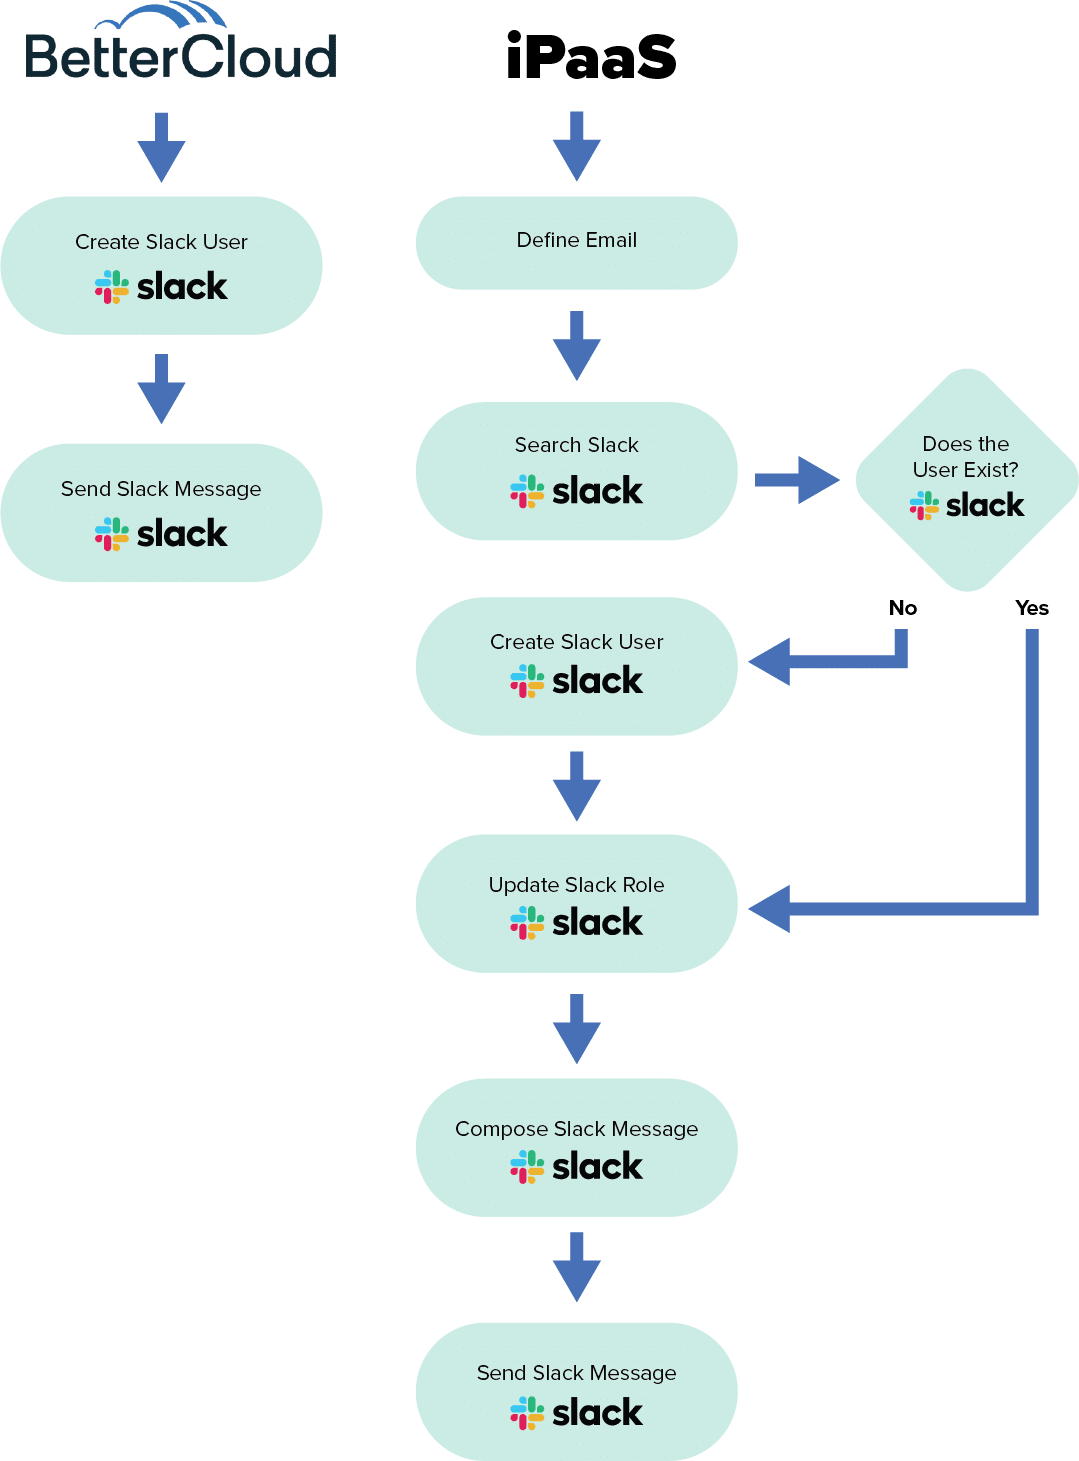 A workflow from an SMP side by side with a workflow from an iPaaS